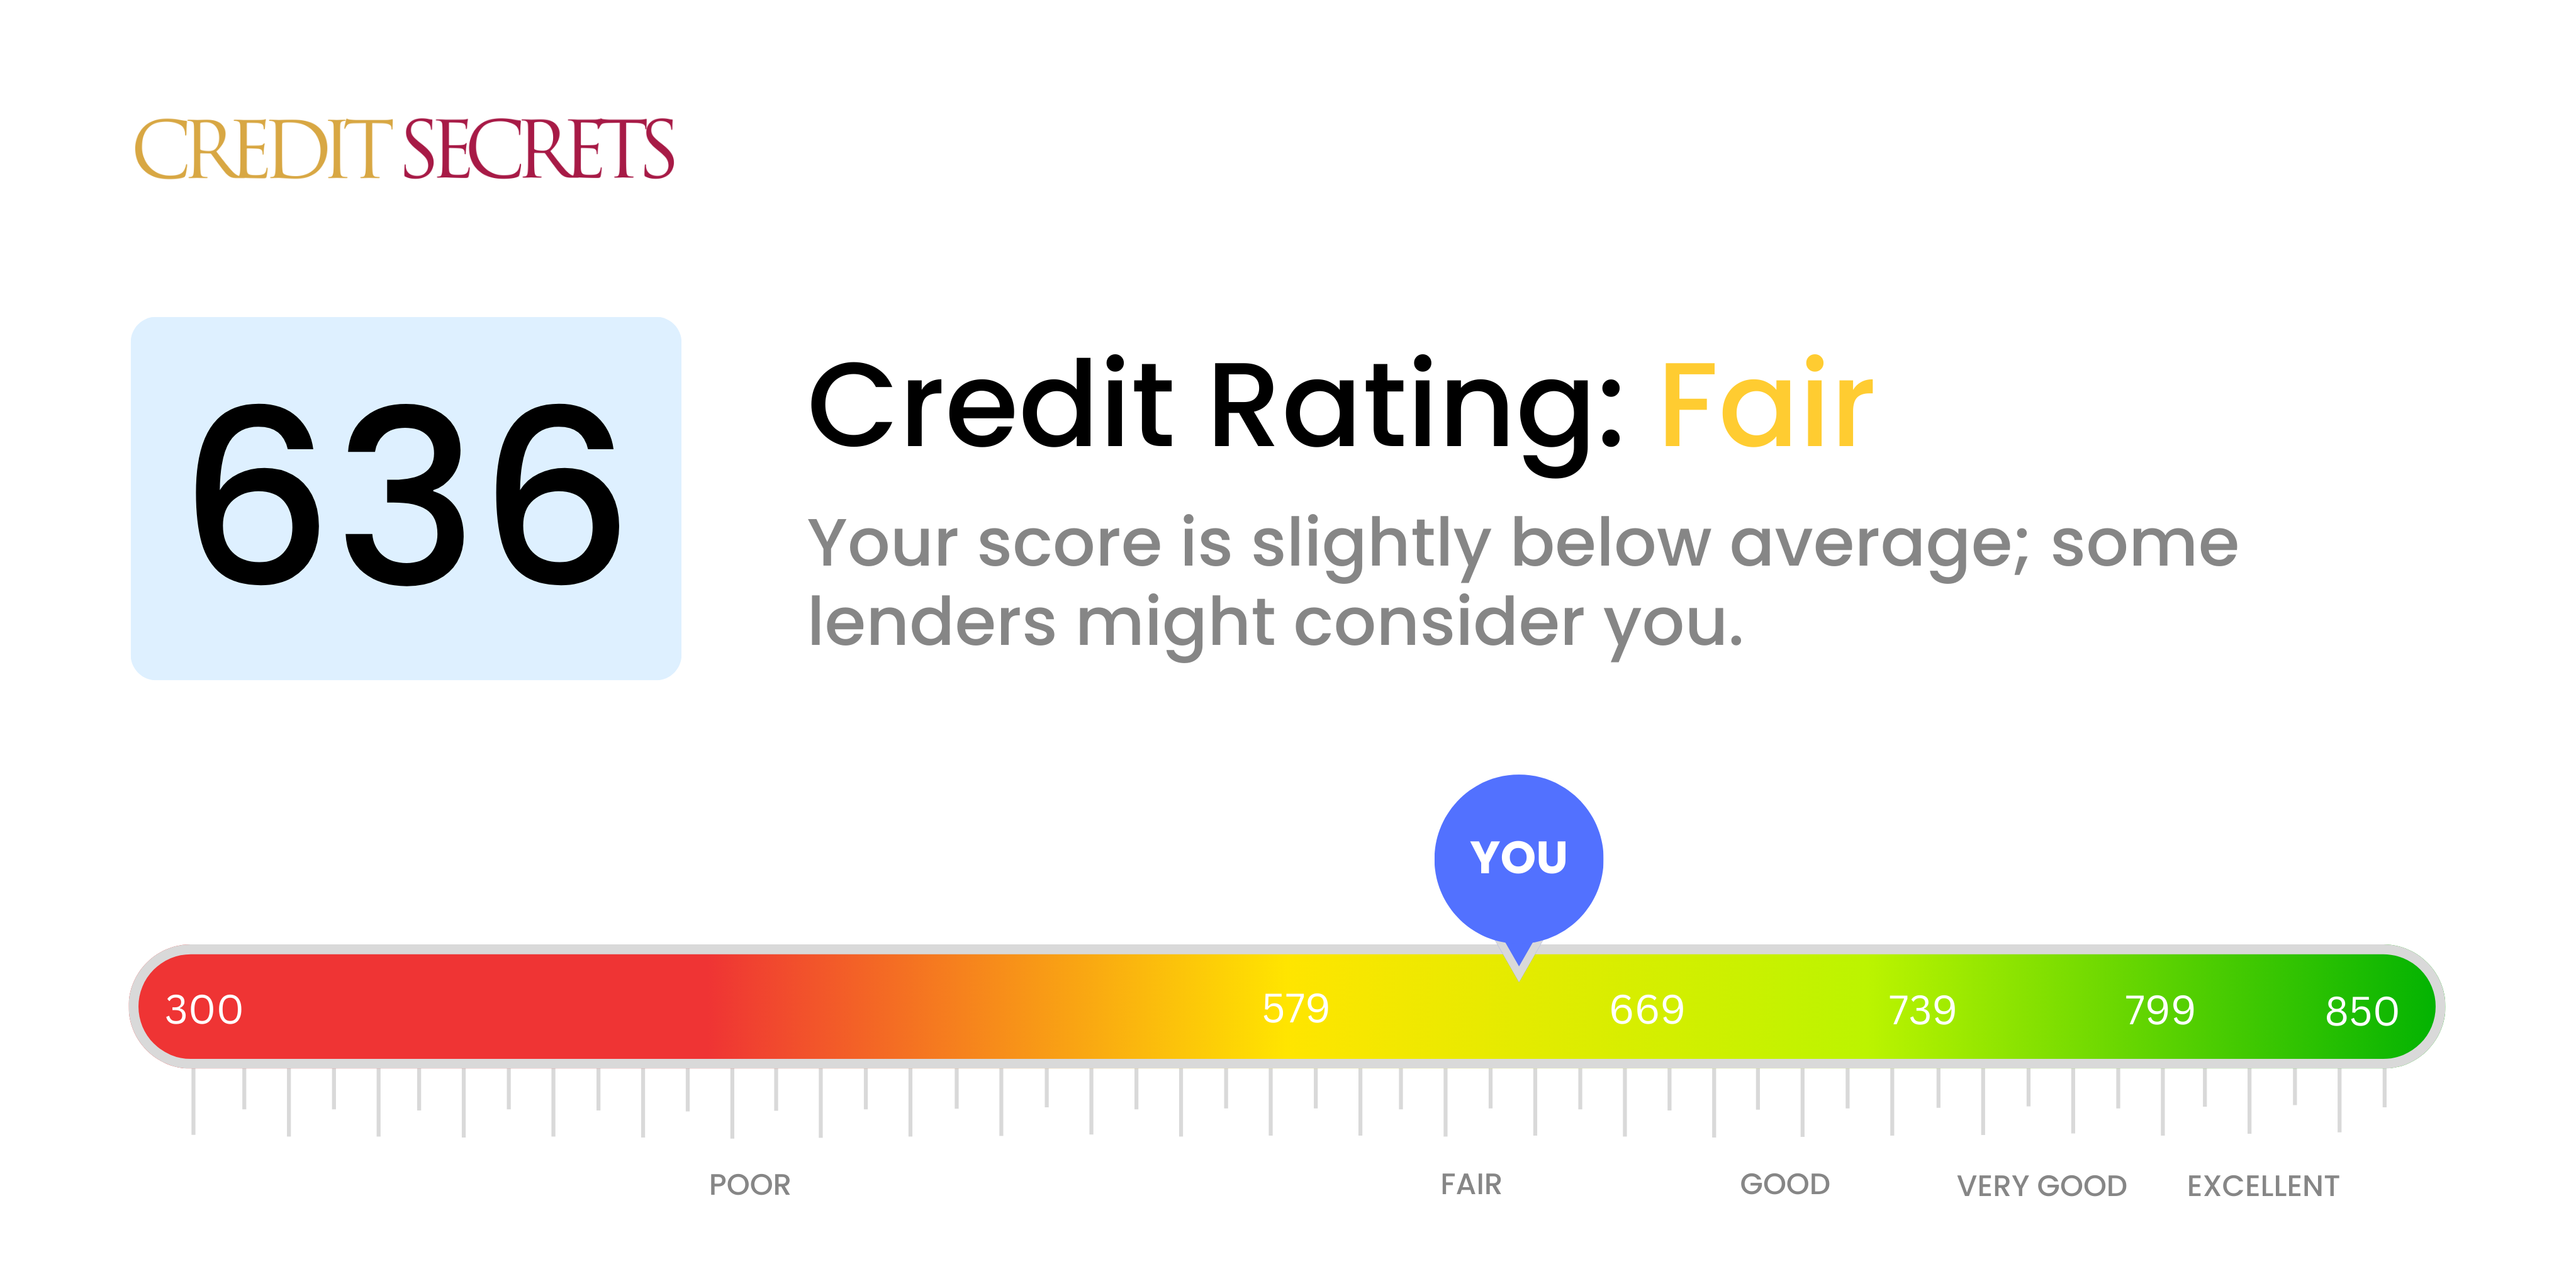 Is 636 a good credit score?